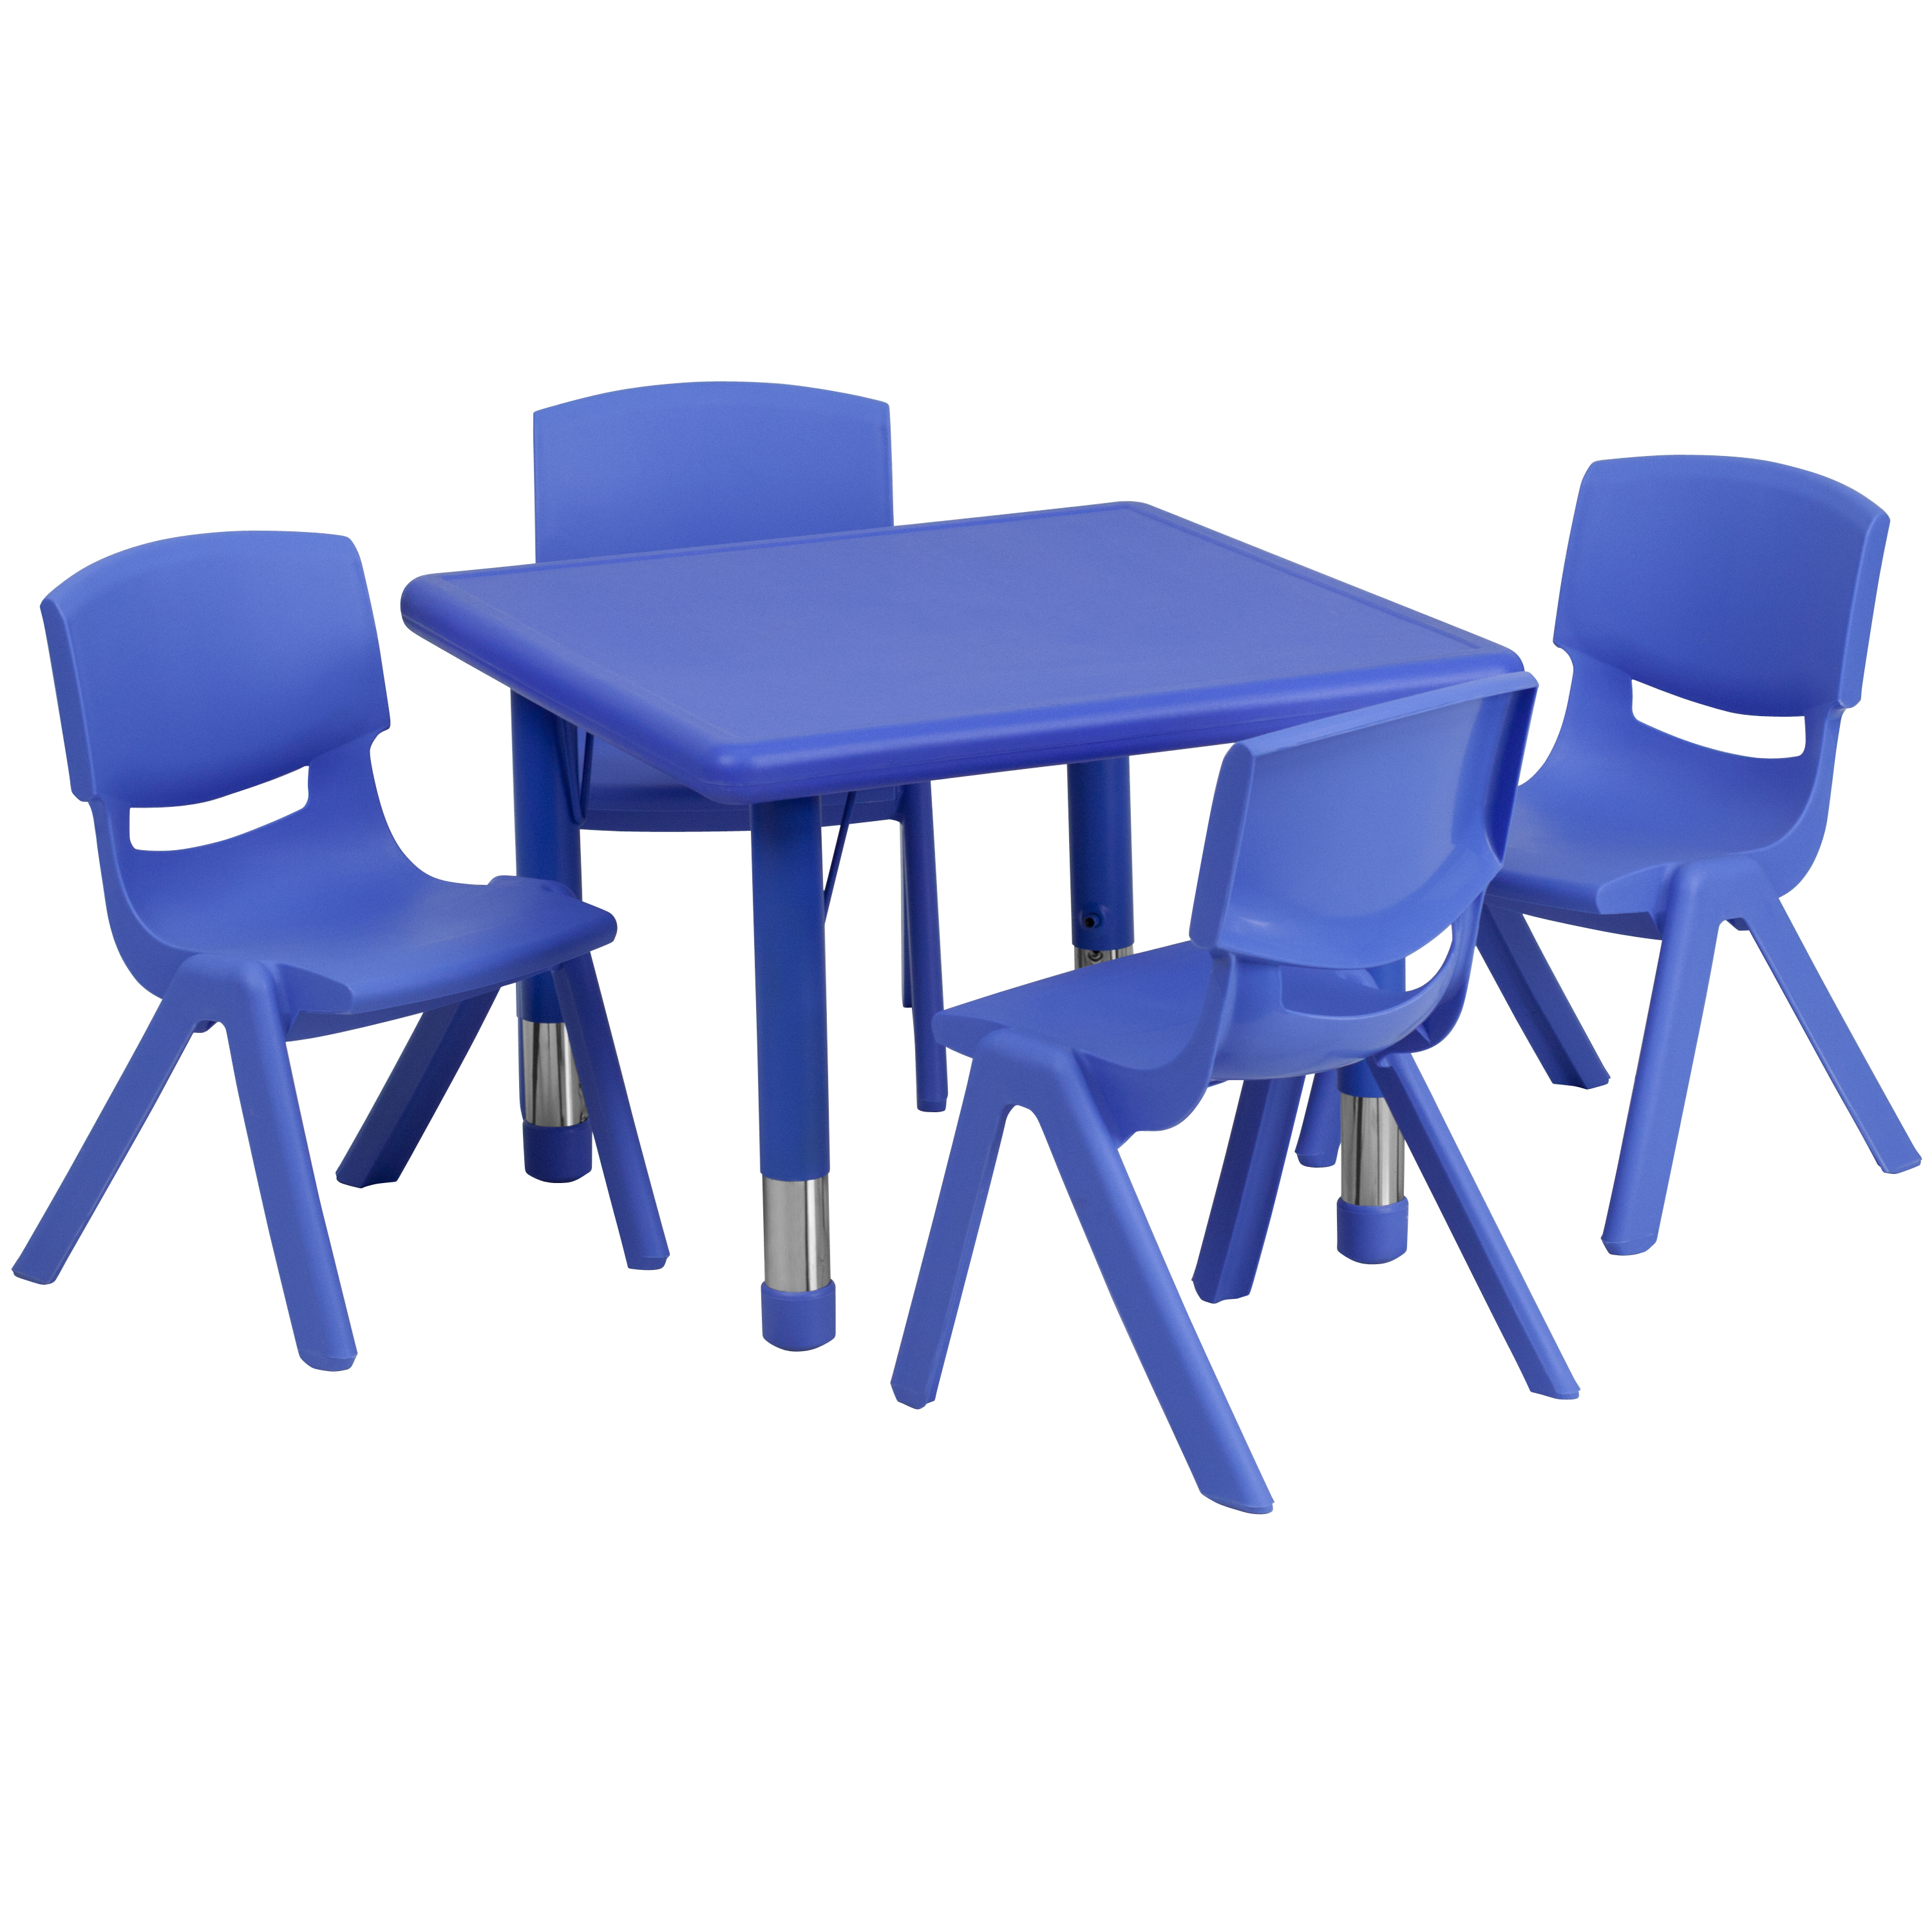 Flash Furniture 24'' Square Blue Plastic Height Adjustable Activity Table Set with 4 Chairs - image 3 of 7